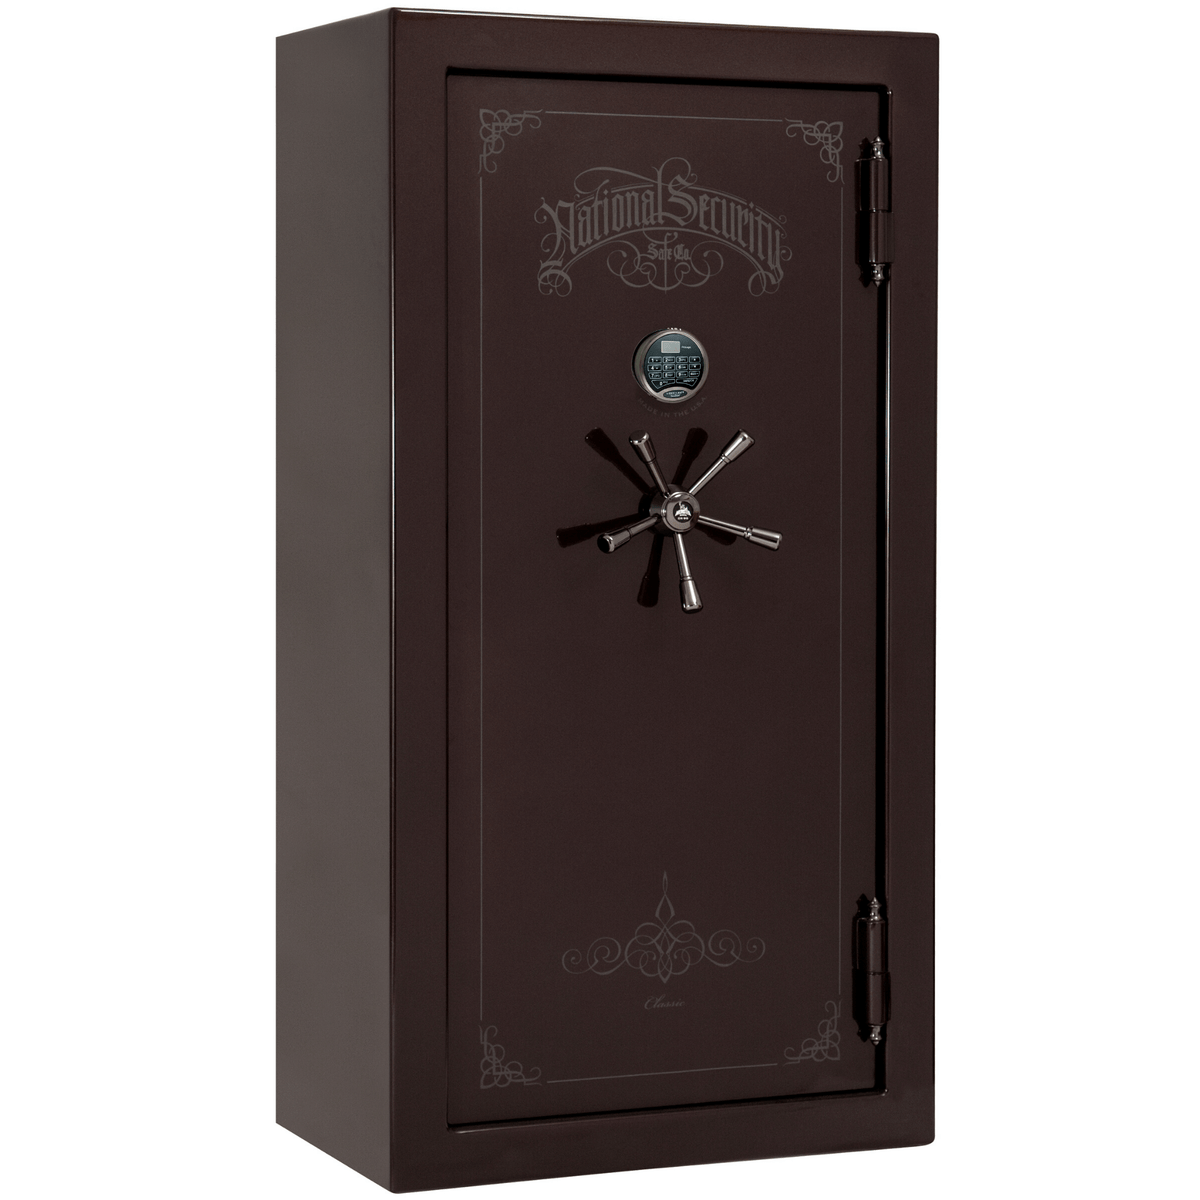 Liberty Safe Classic Plus 25 in Black Cherry Gloss with Black Chrome Electronic Lock, closed door.